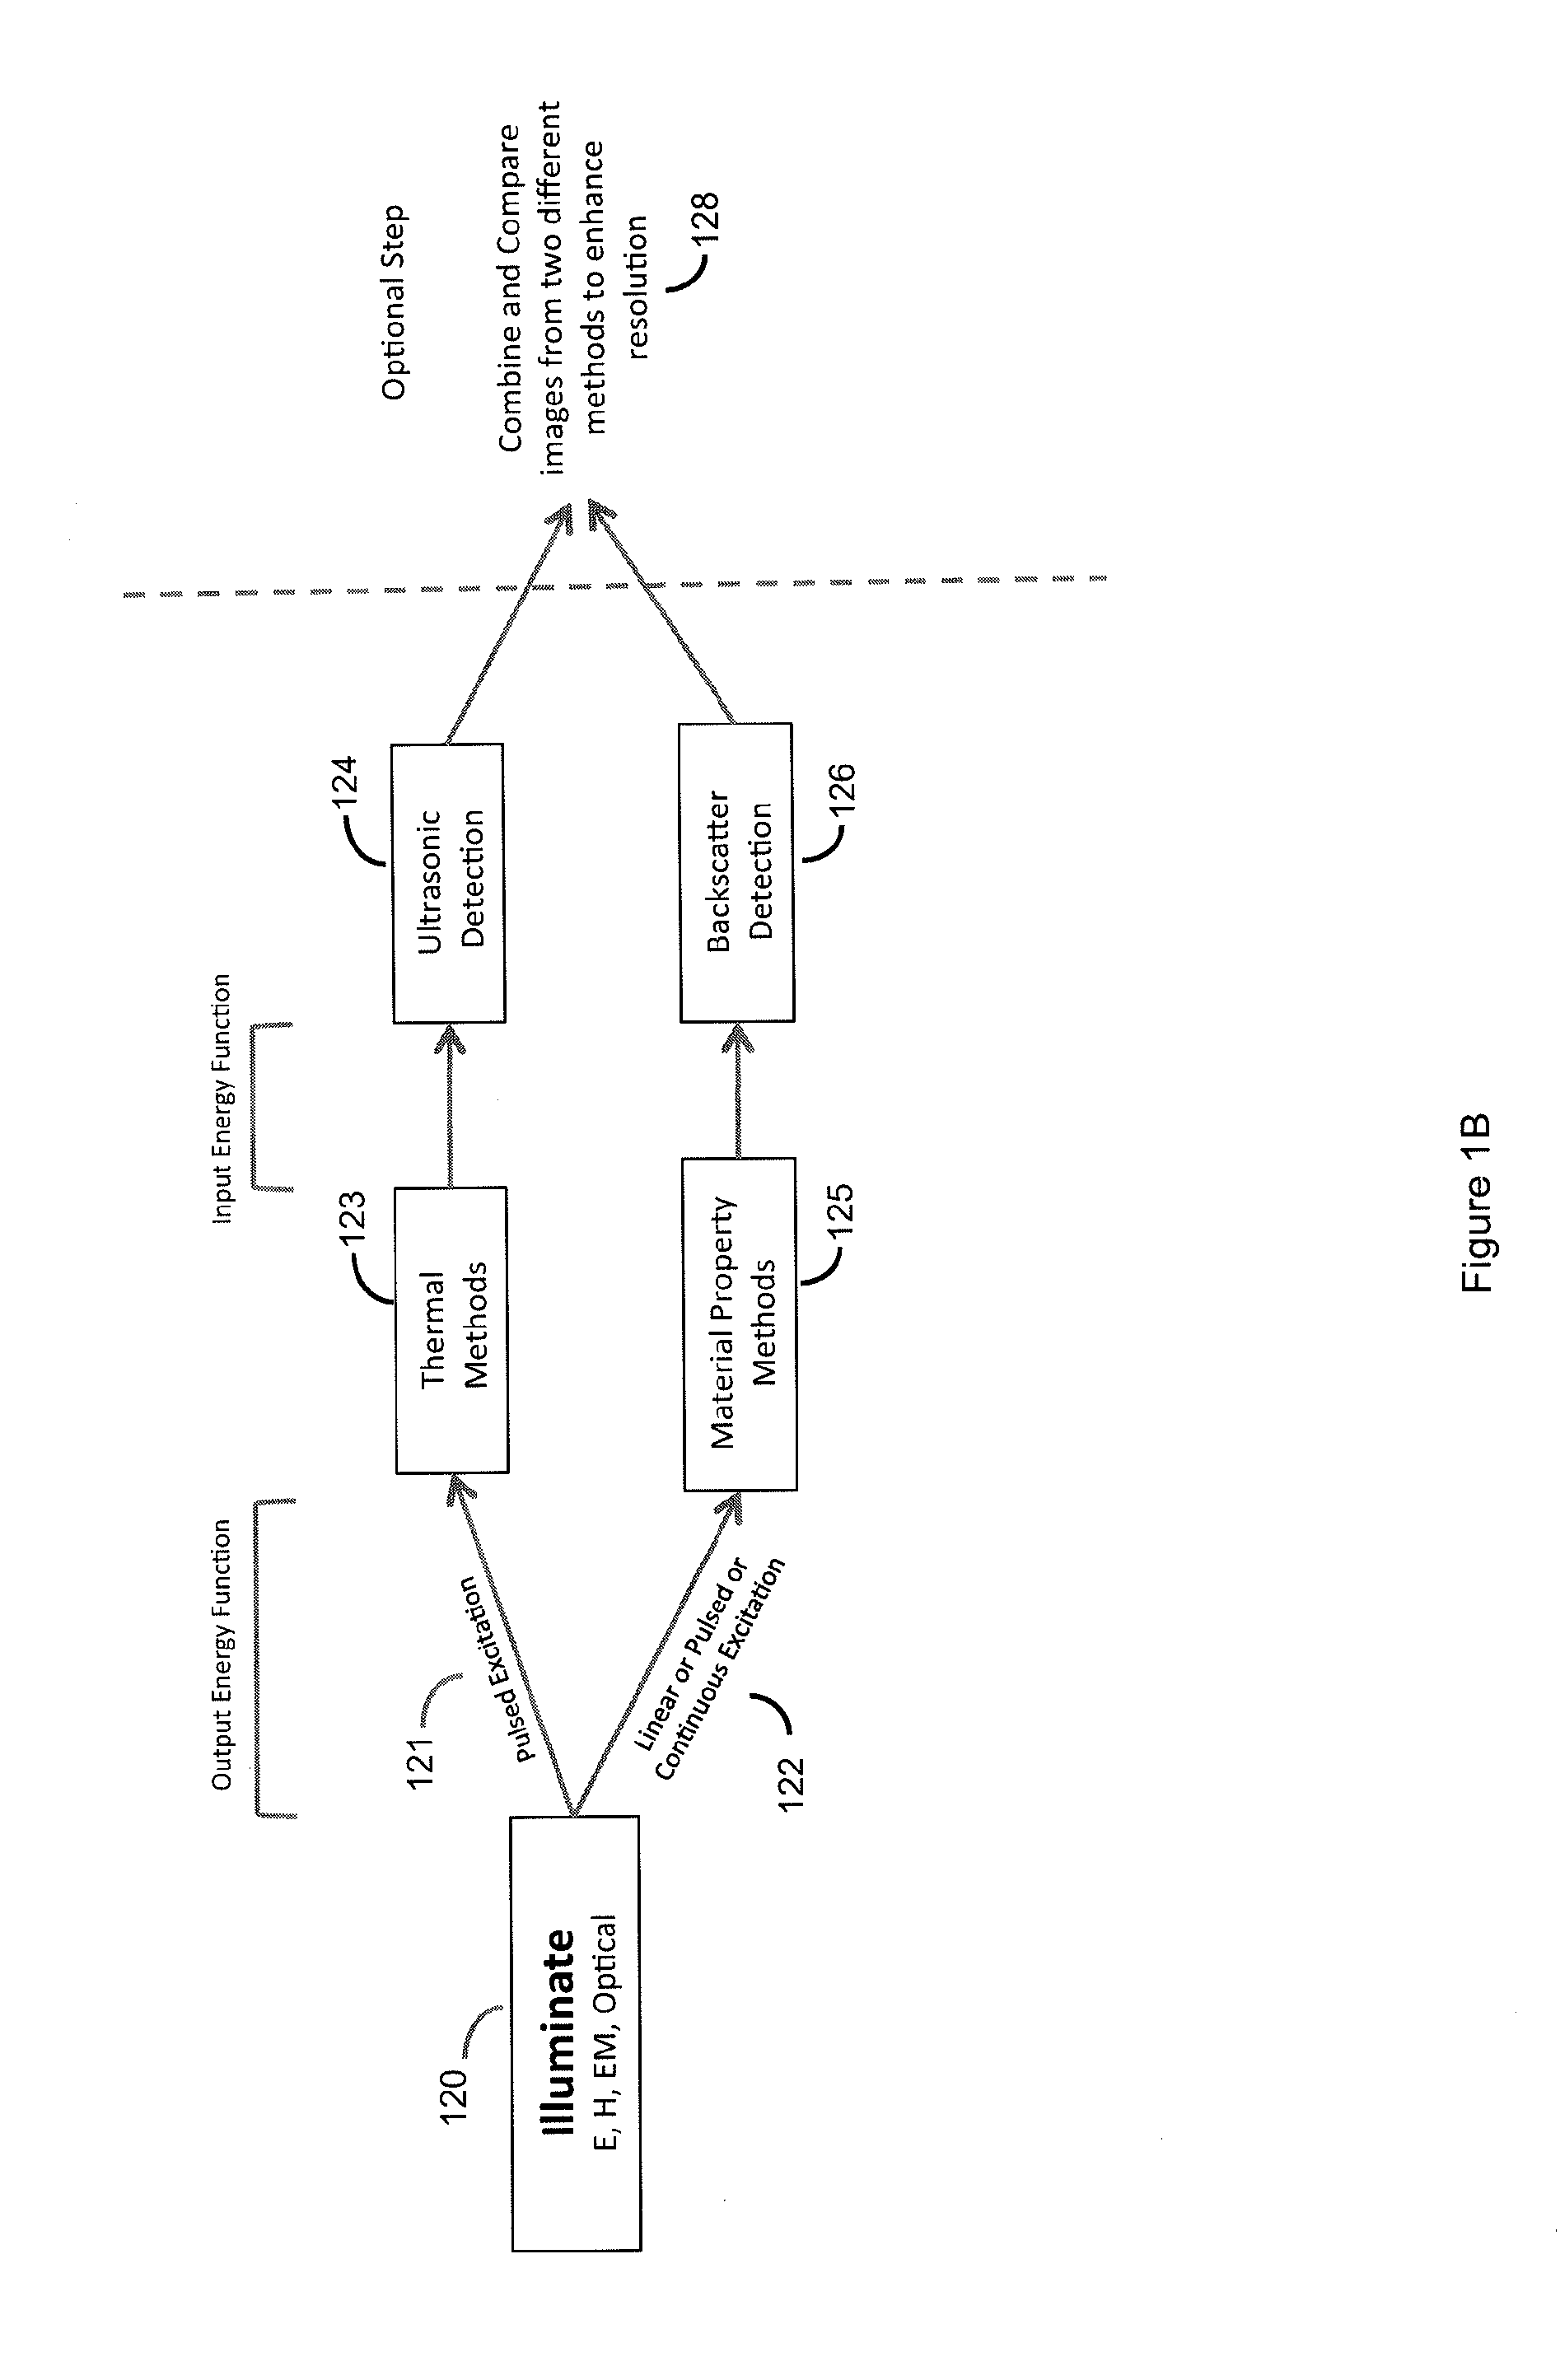 System for correlating energy field characteristics with target particle characteristics in the application of the energy field to a living organism for detection of invasive agents